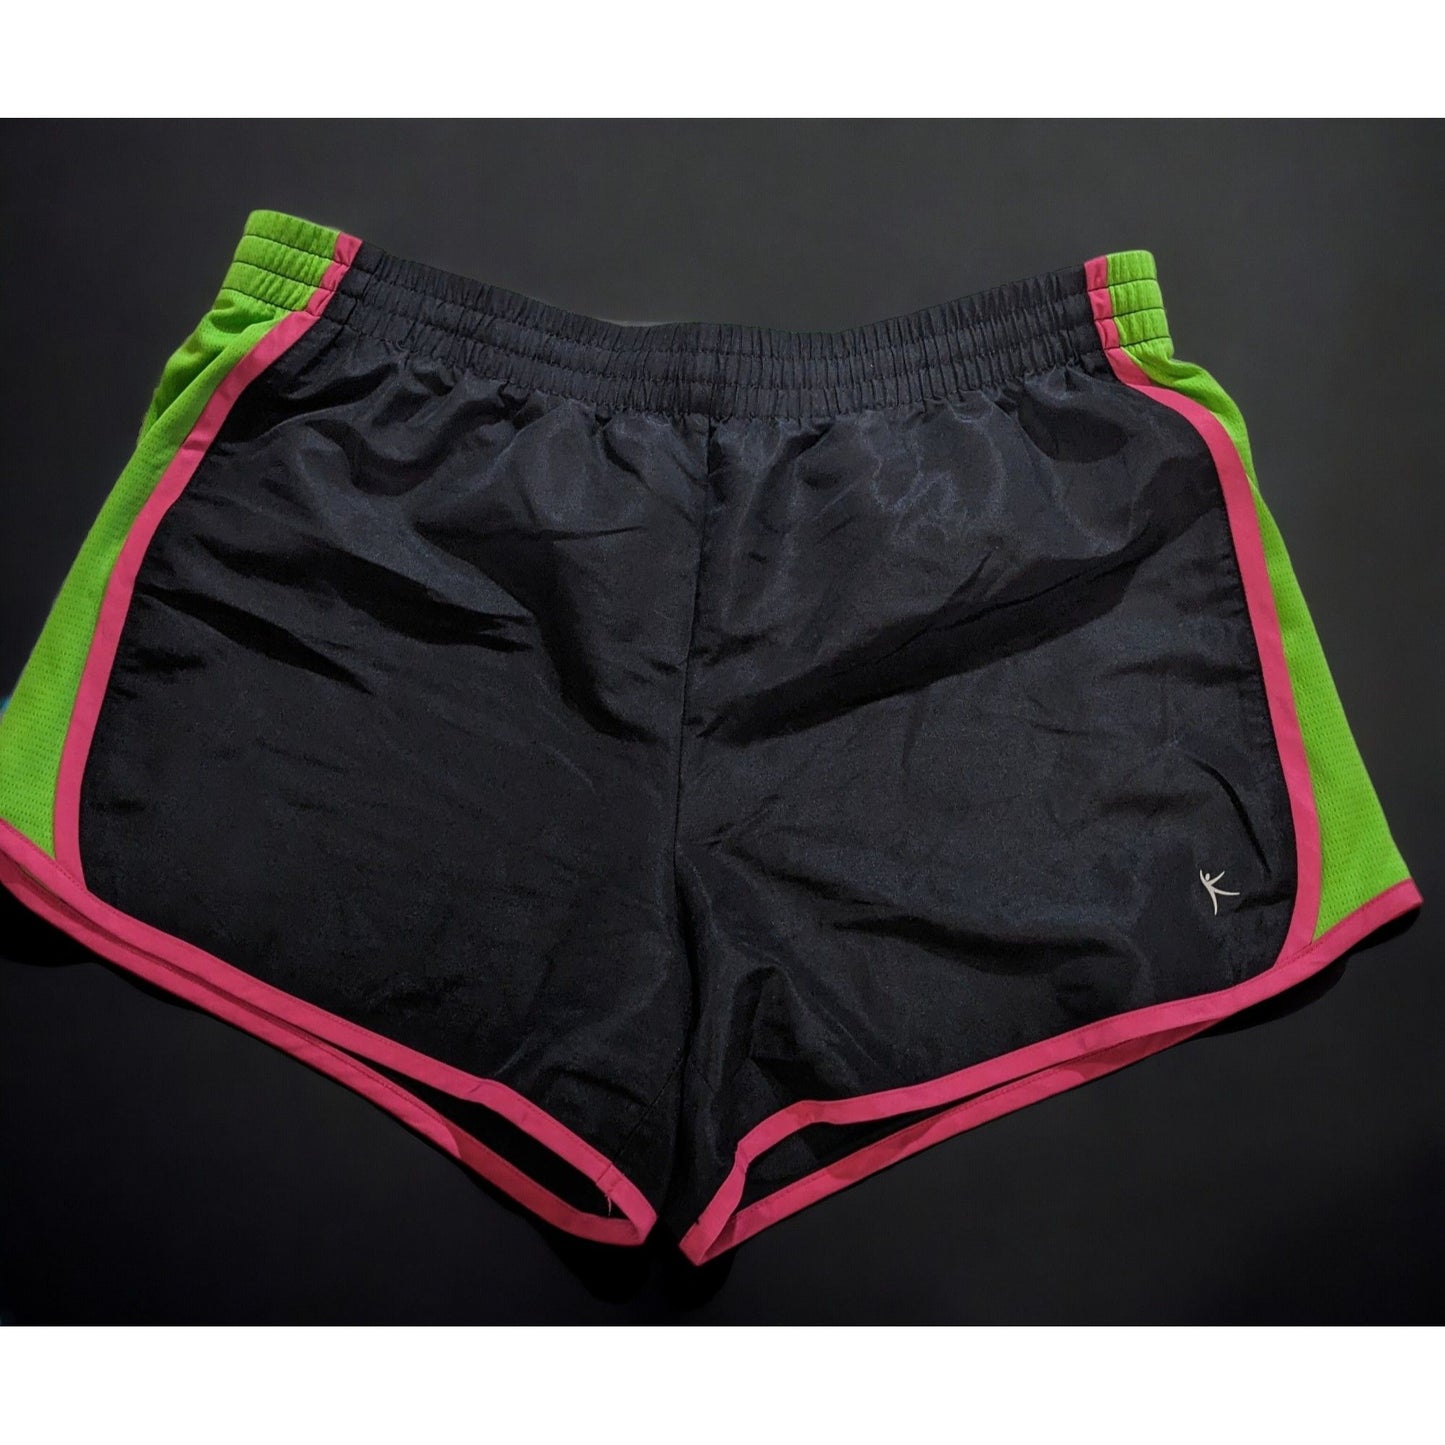 Danskin Now Black And Neon Athletic Shorts